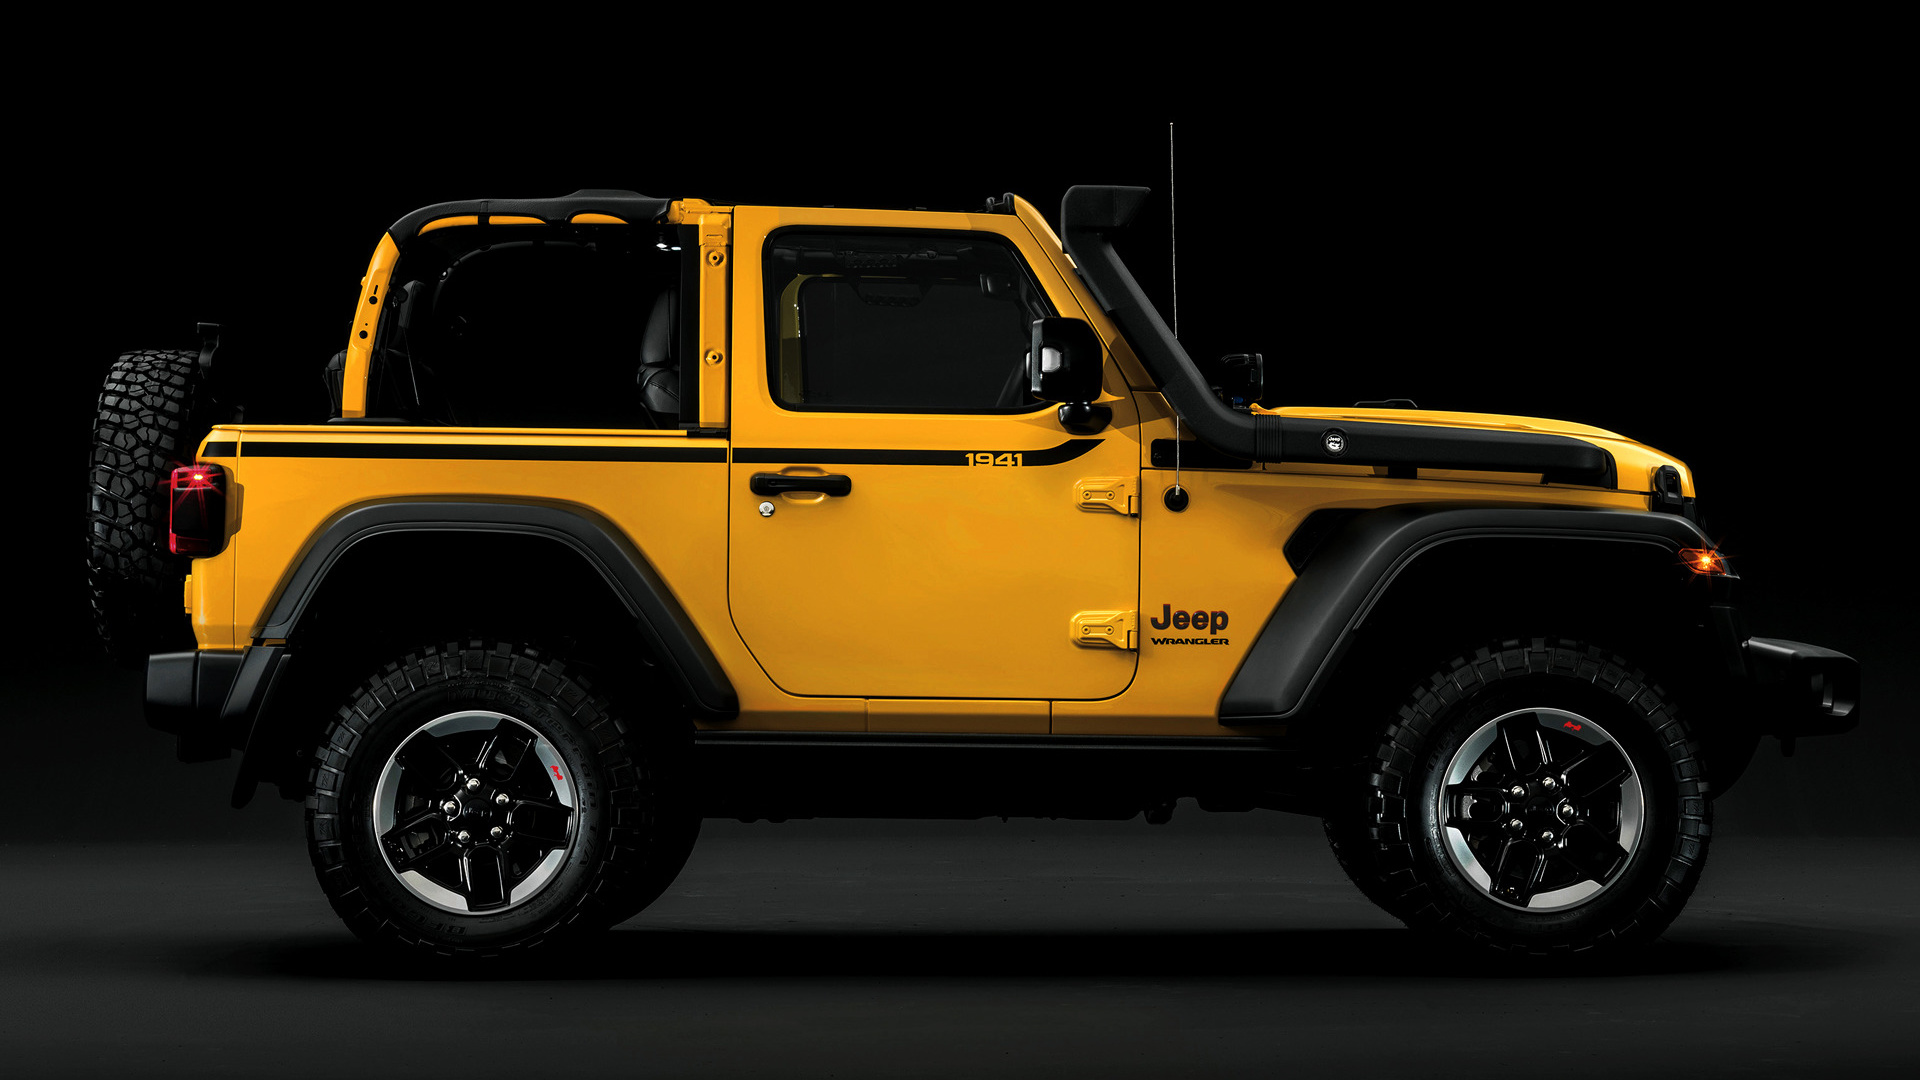 Jeep Wrangler Rubicon 1941 By Mopar wallpapers for desktop, download free Jeep  Wrangler Rubicon 1941 By Mopar pictures and backgrounds for PC 